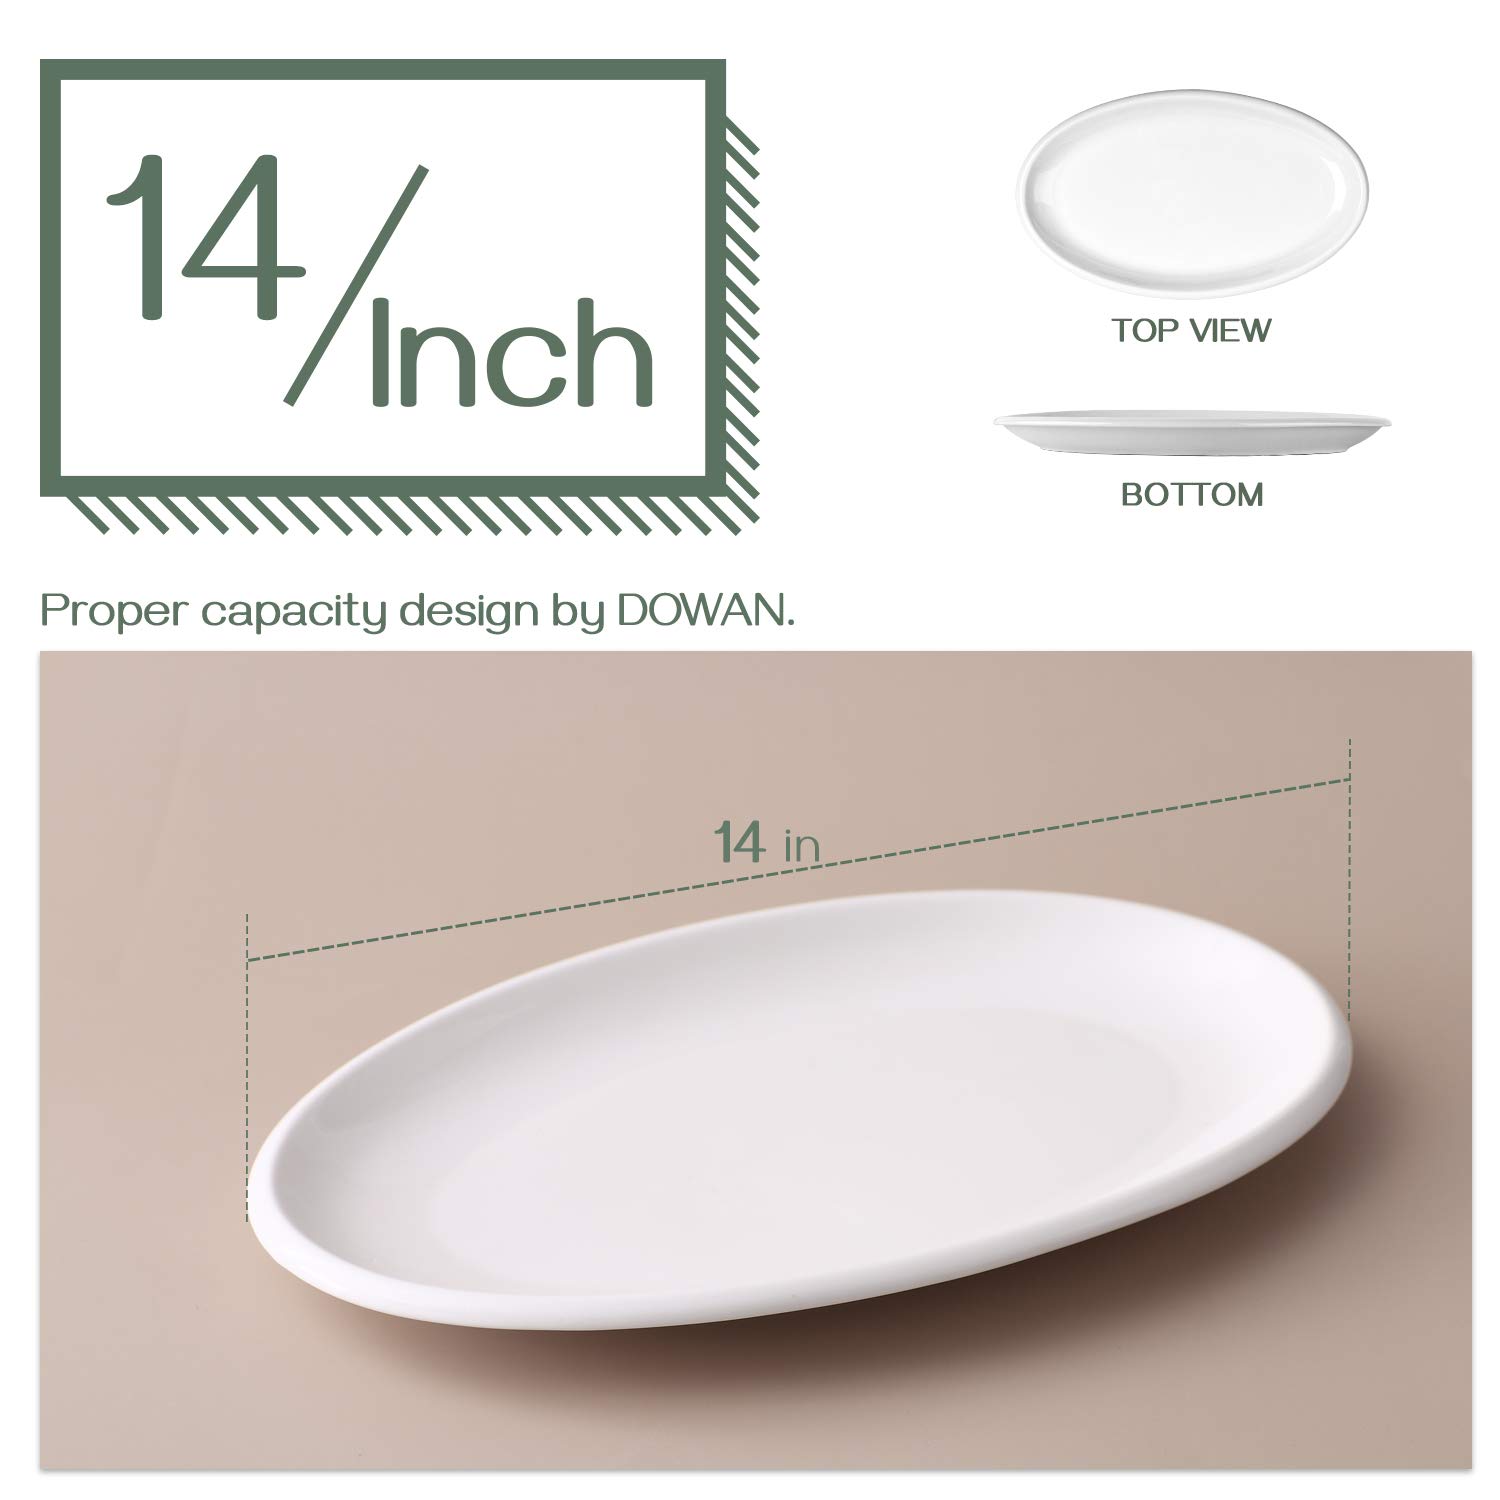 DOWAN 14" Large Serving Platters, Oval Thanksgiving Serving Plates, White Porcelain Platters Oven Safe, Dinner Plates Serving Dishes for Entertaining, Party, Meat, Appetizers, Dessert, Set of 2, White